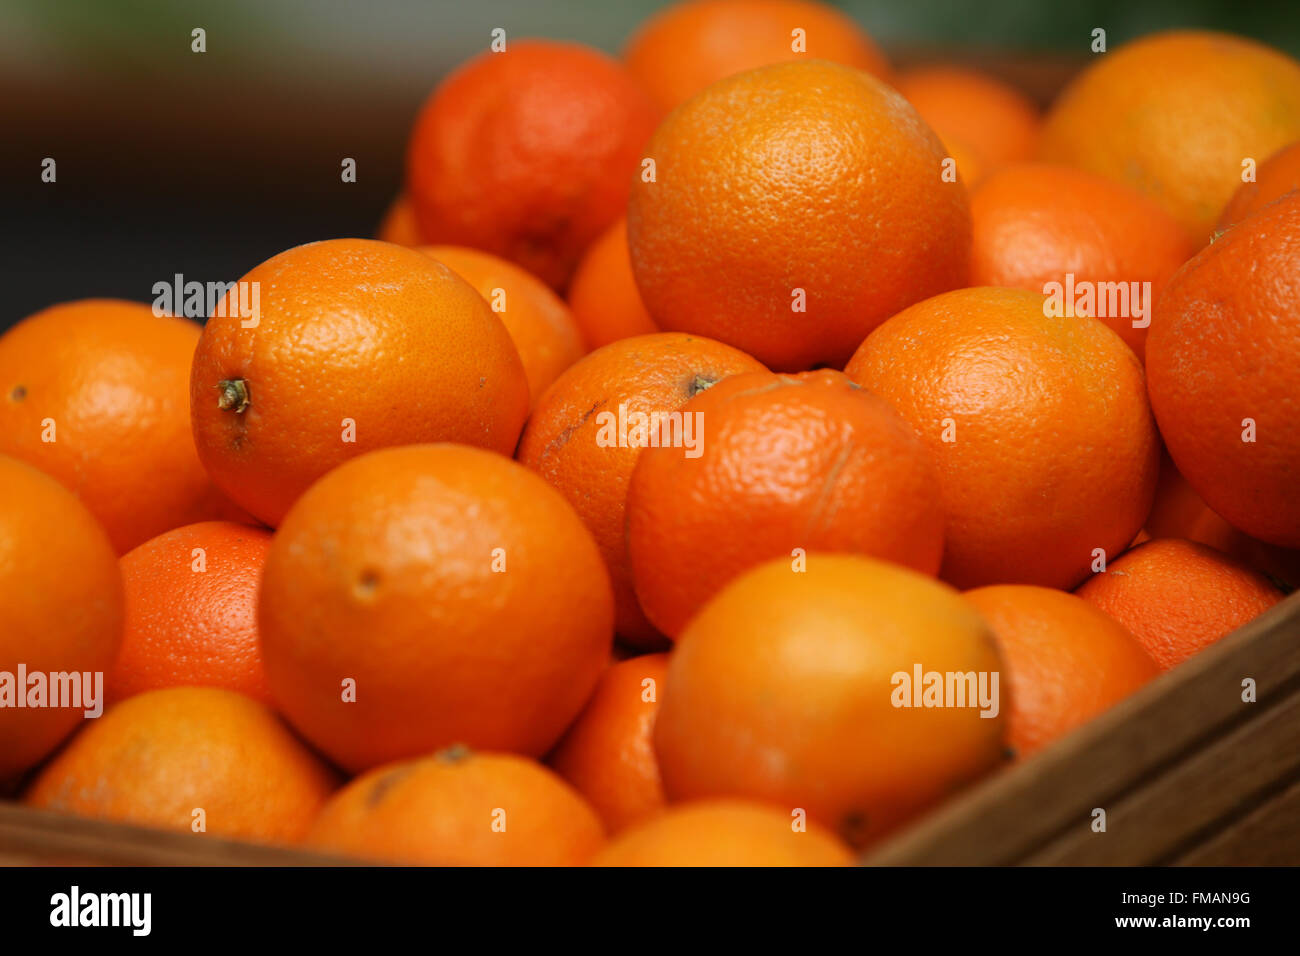 Oranges on display in a school café in Brighton, East Sussex, UK. Stock Photo